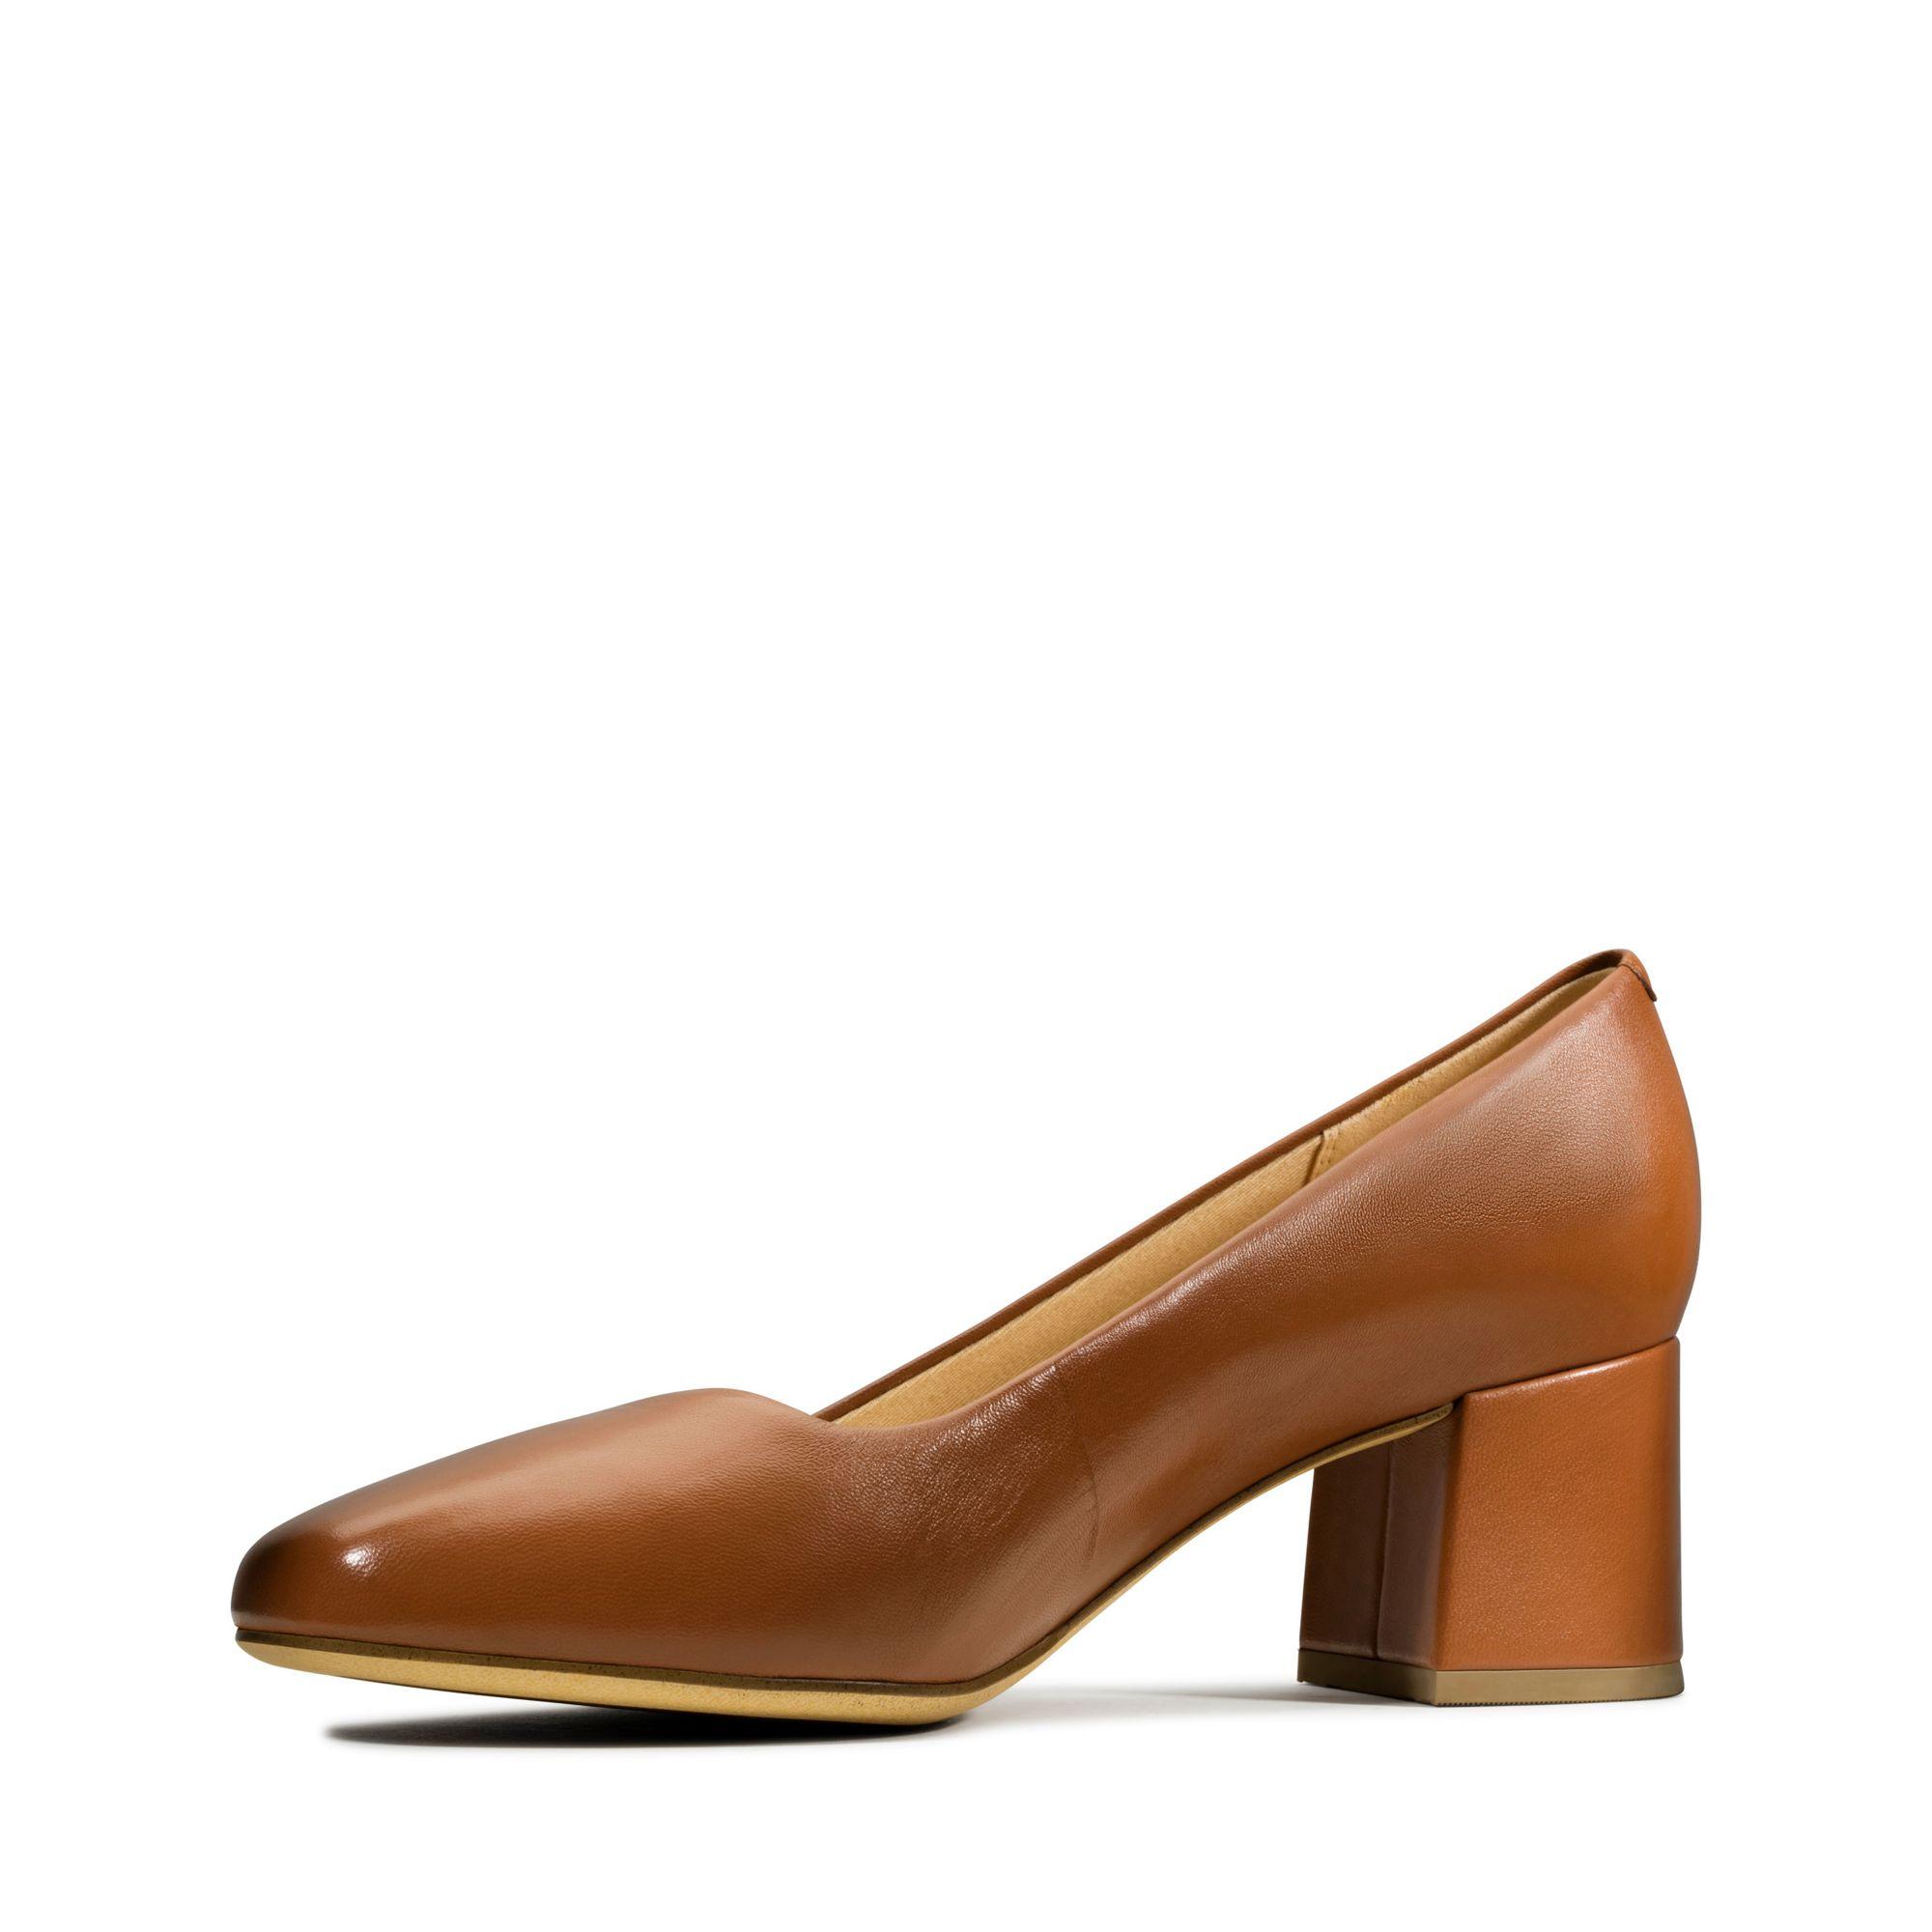 Clarks Leather Sheer Rose in Tan Leather (Brown) - Lyst